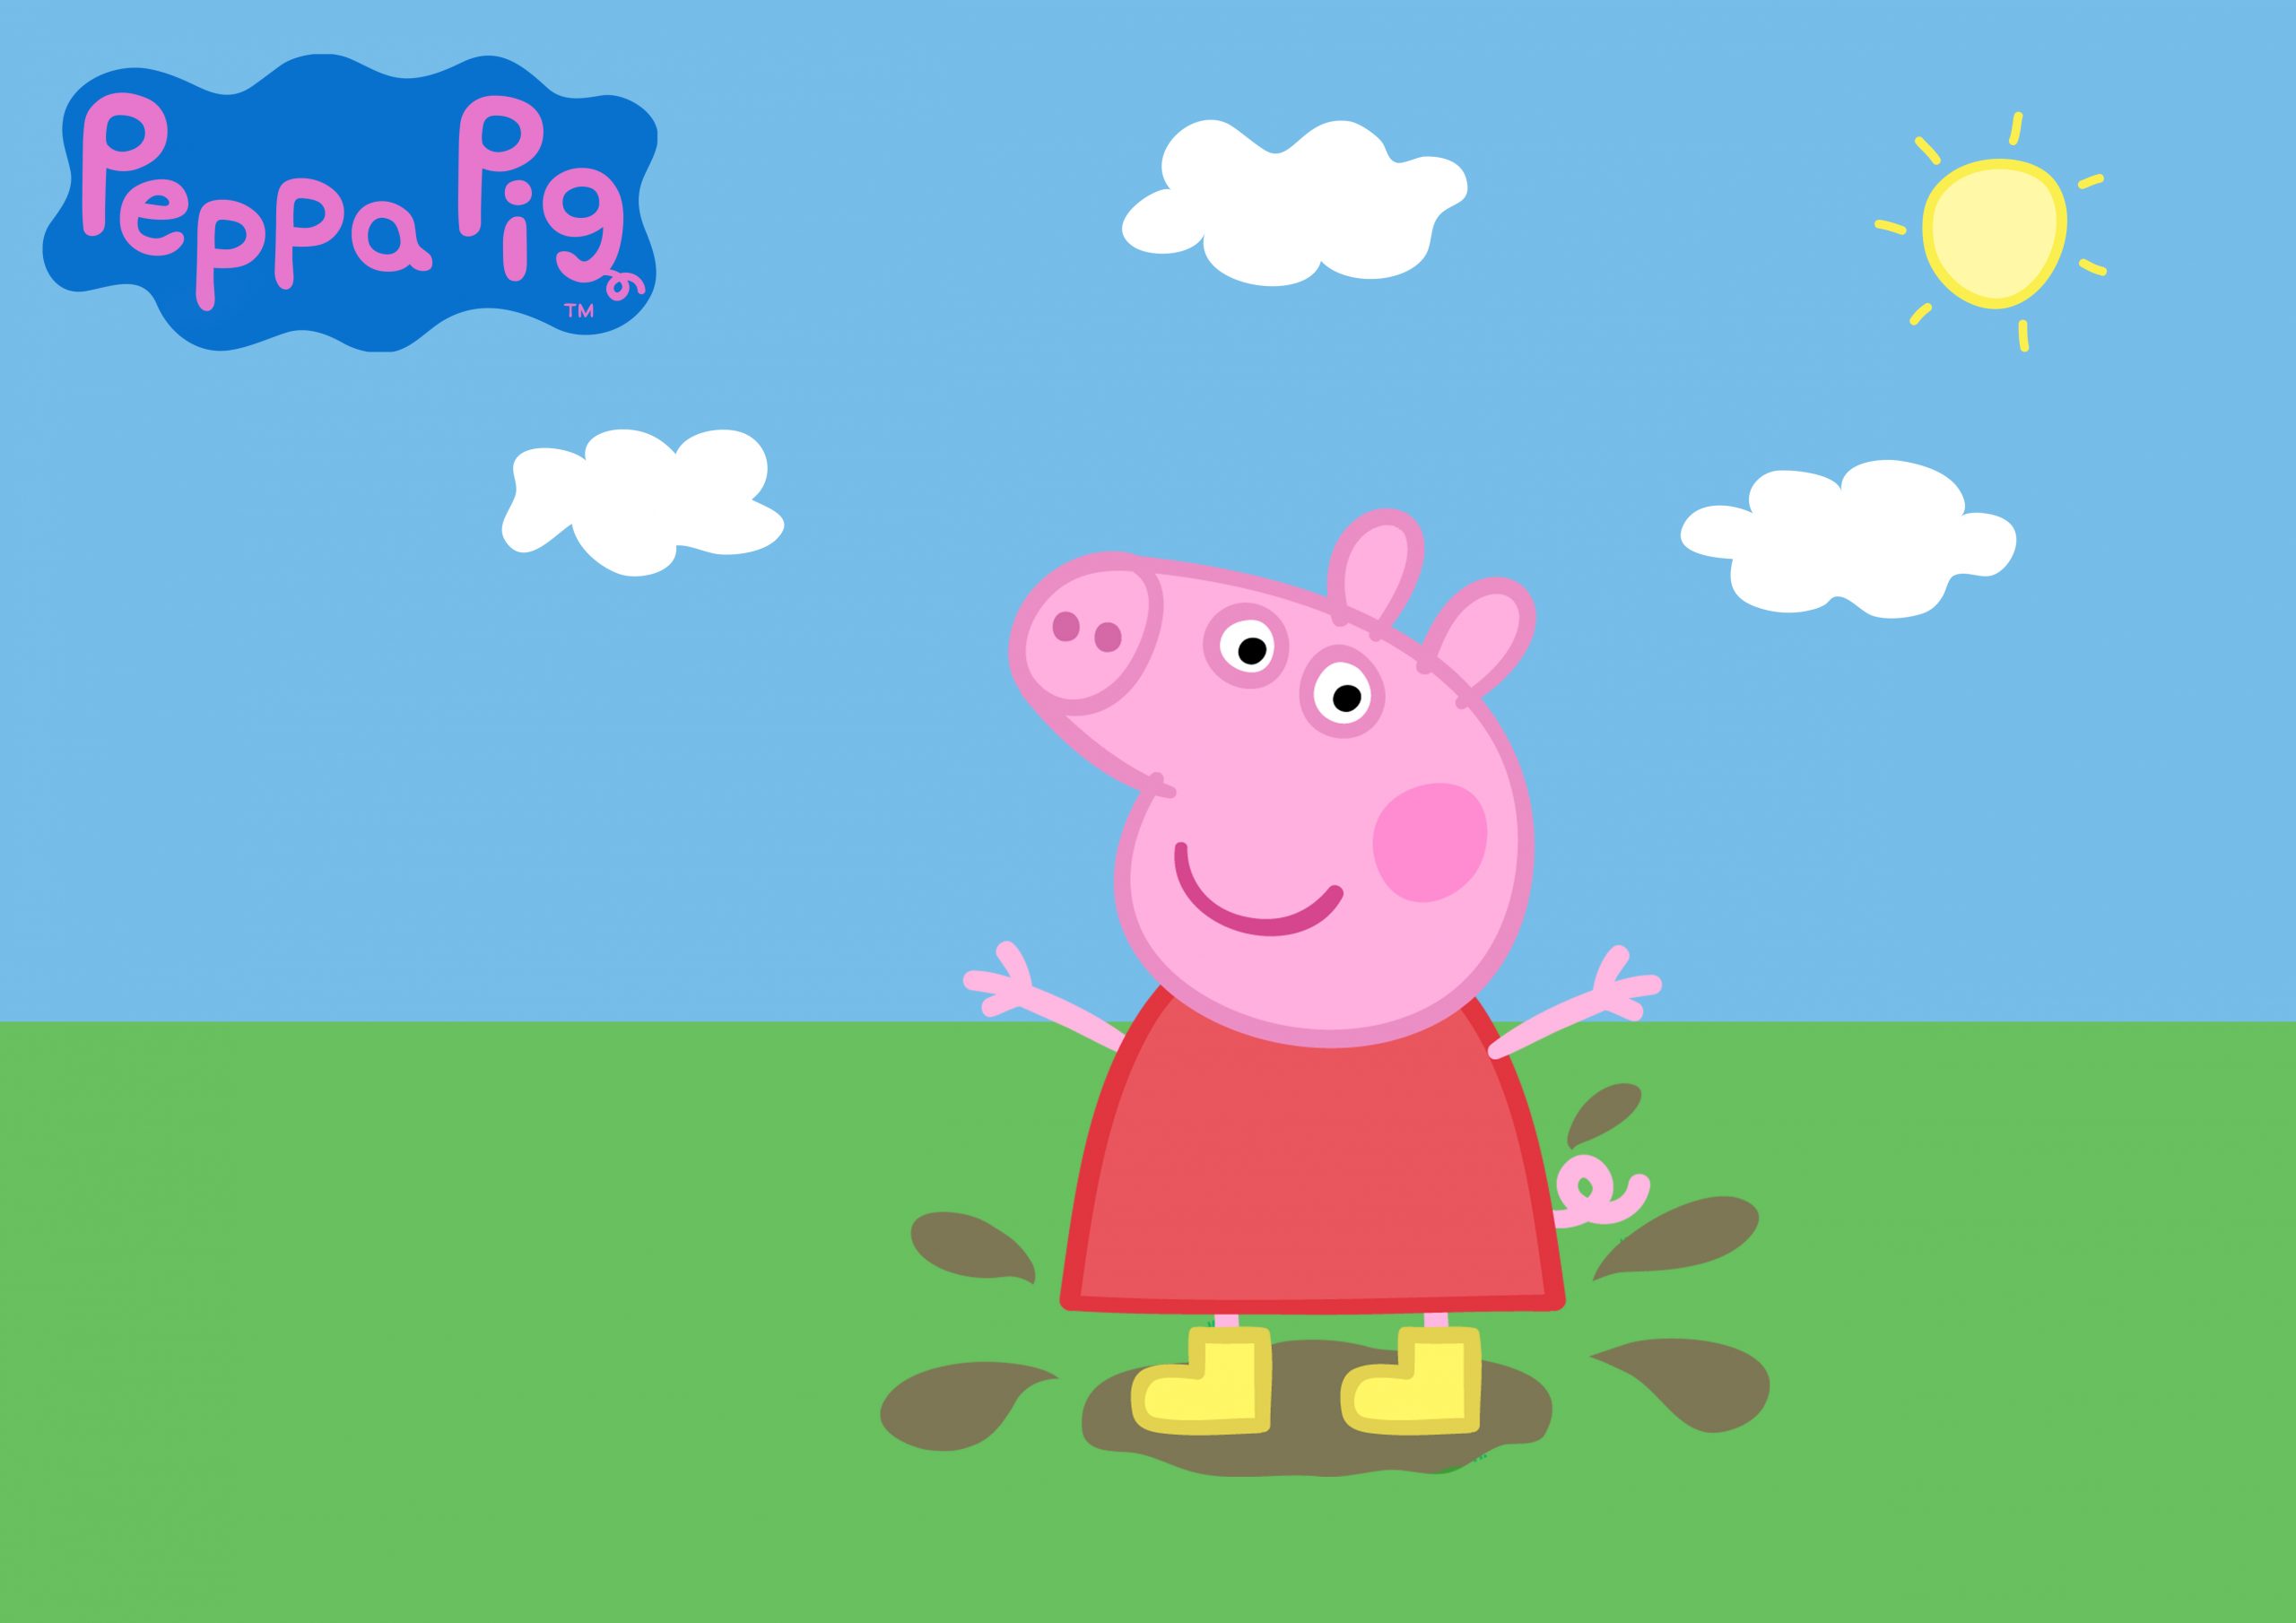 Hollywood superstar cast in Peppa Pig one week after A-list fiancée joined show